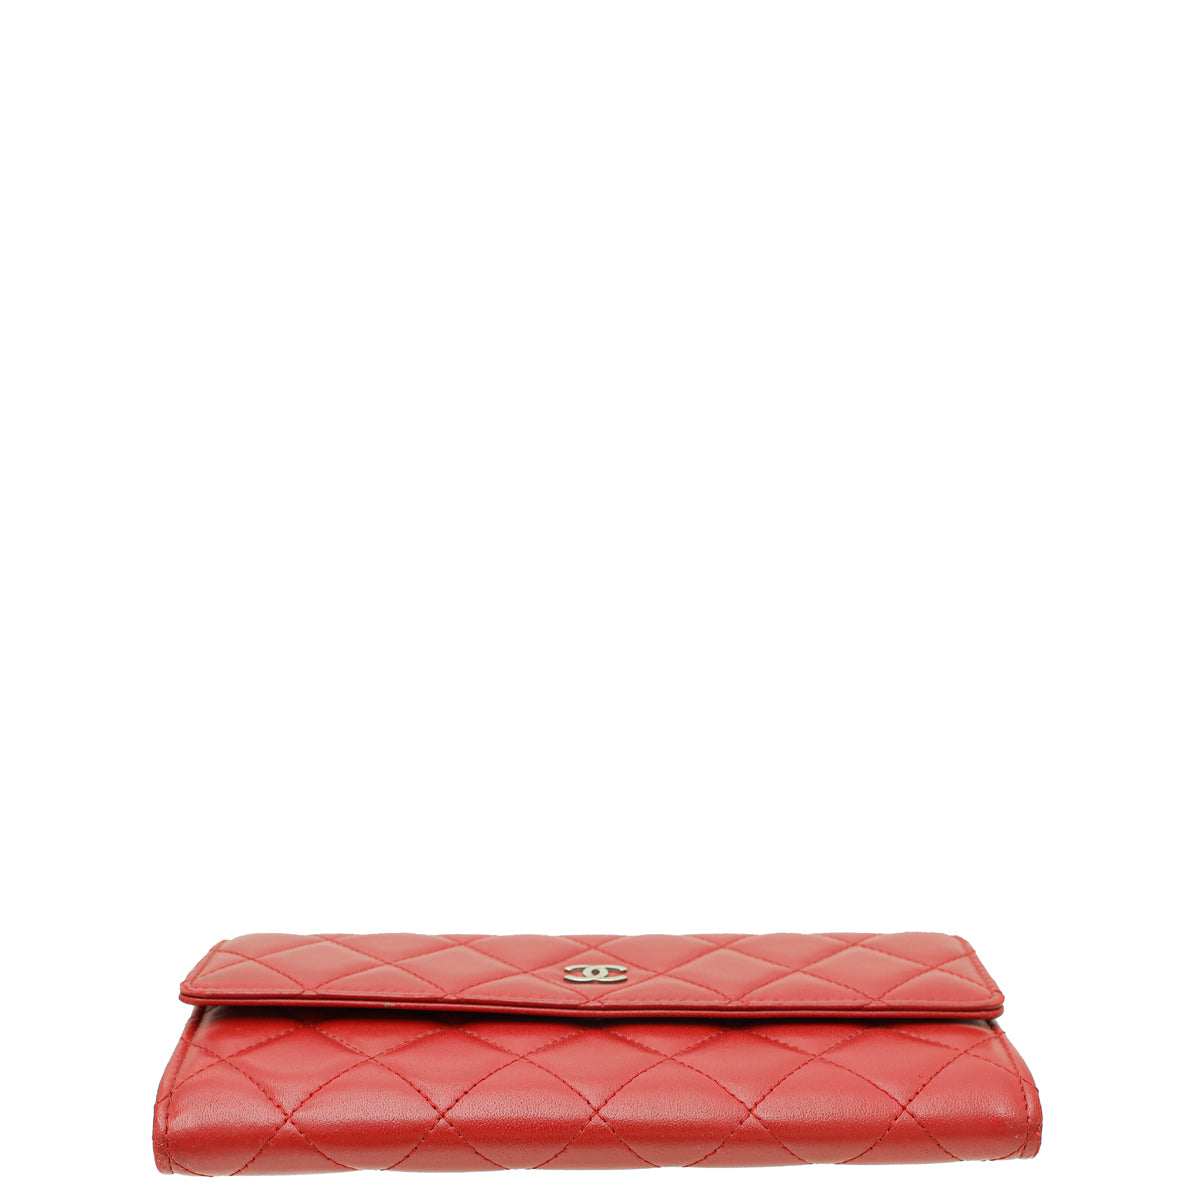 Chanel Red CC Classic Long Flap Wallet